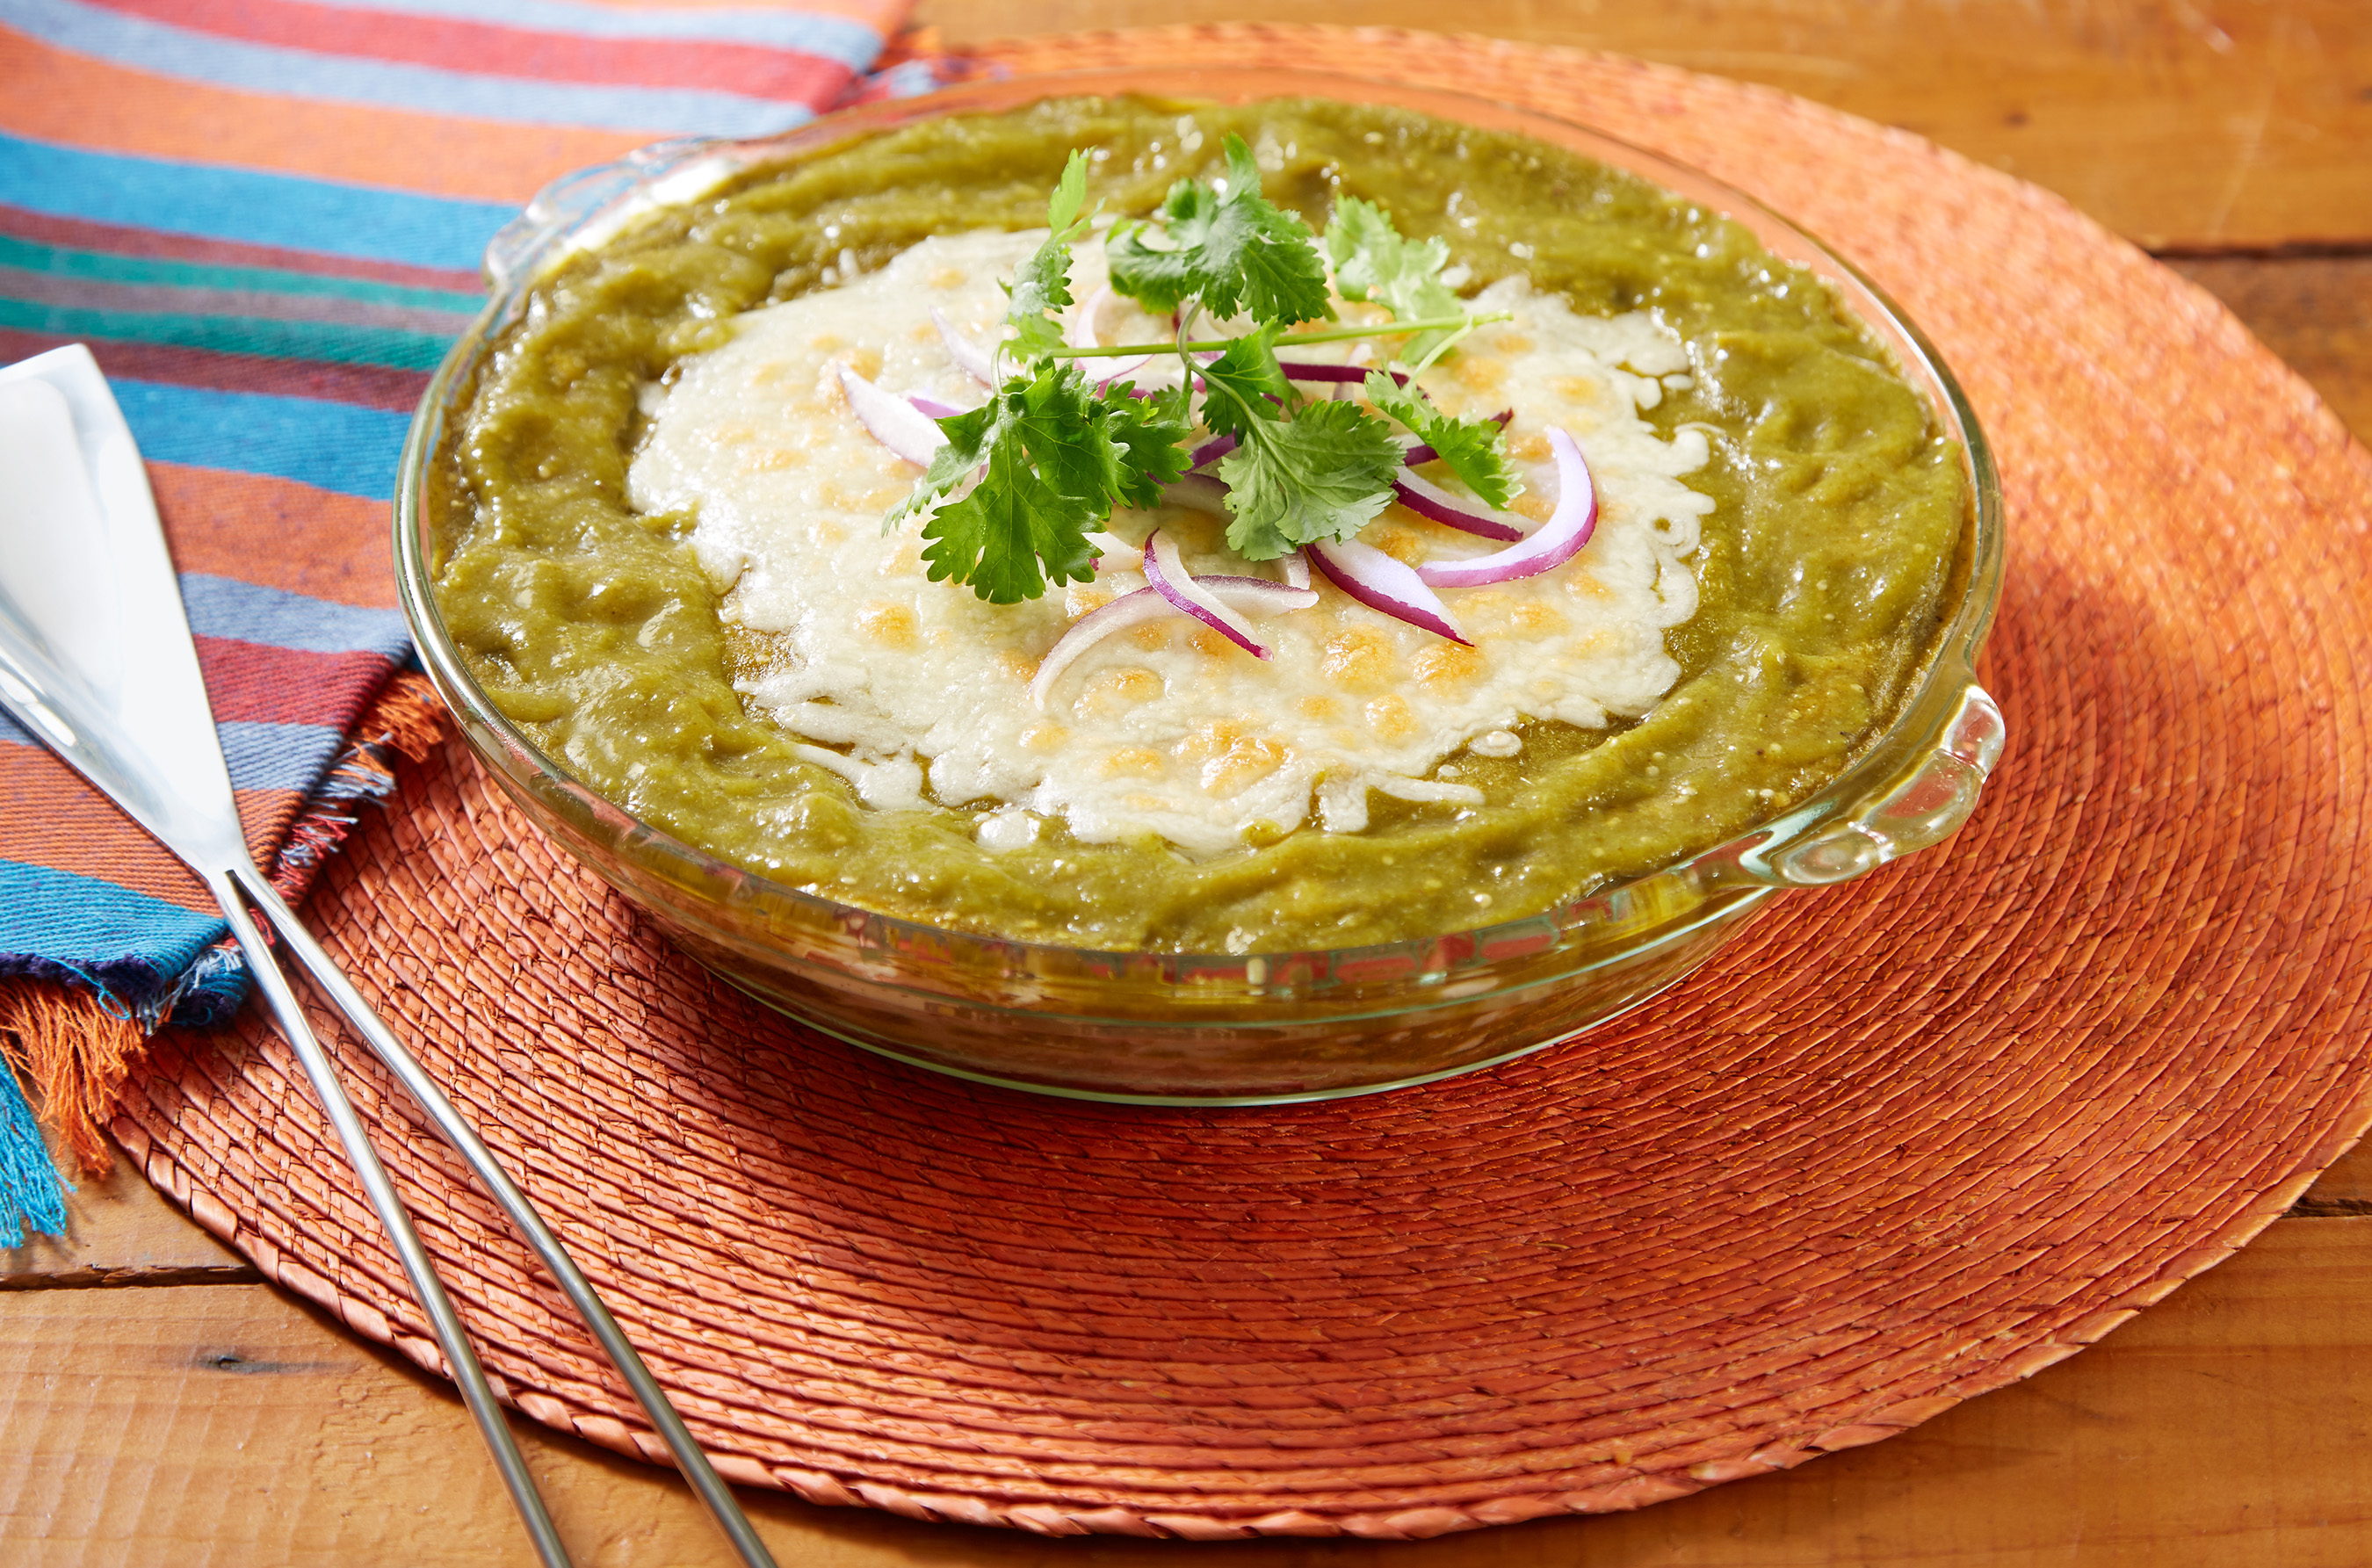 Inspired by cuisines of Guatemala and Mexico, this layered chicken, Oaxaca cheese, corn tortilla and tomatillo-cilantro sauce will compliment any occasion.